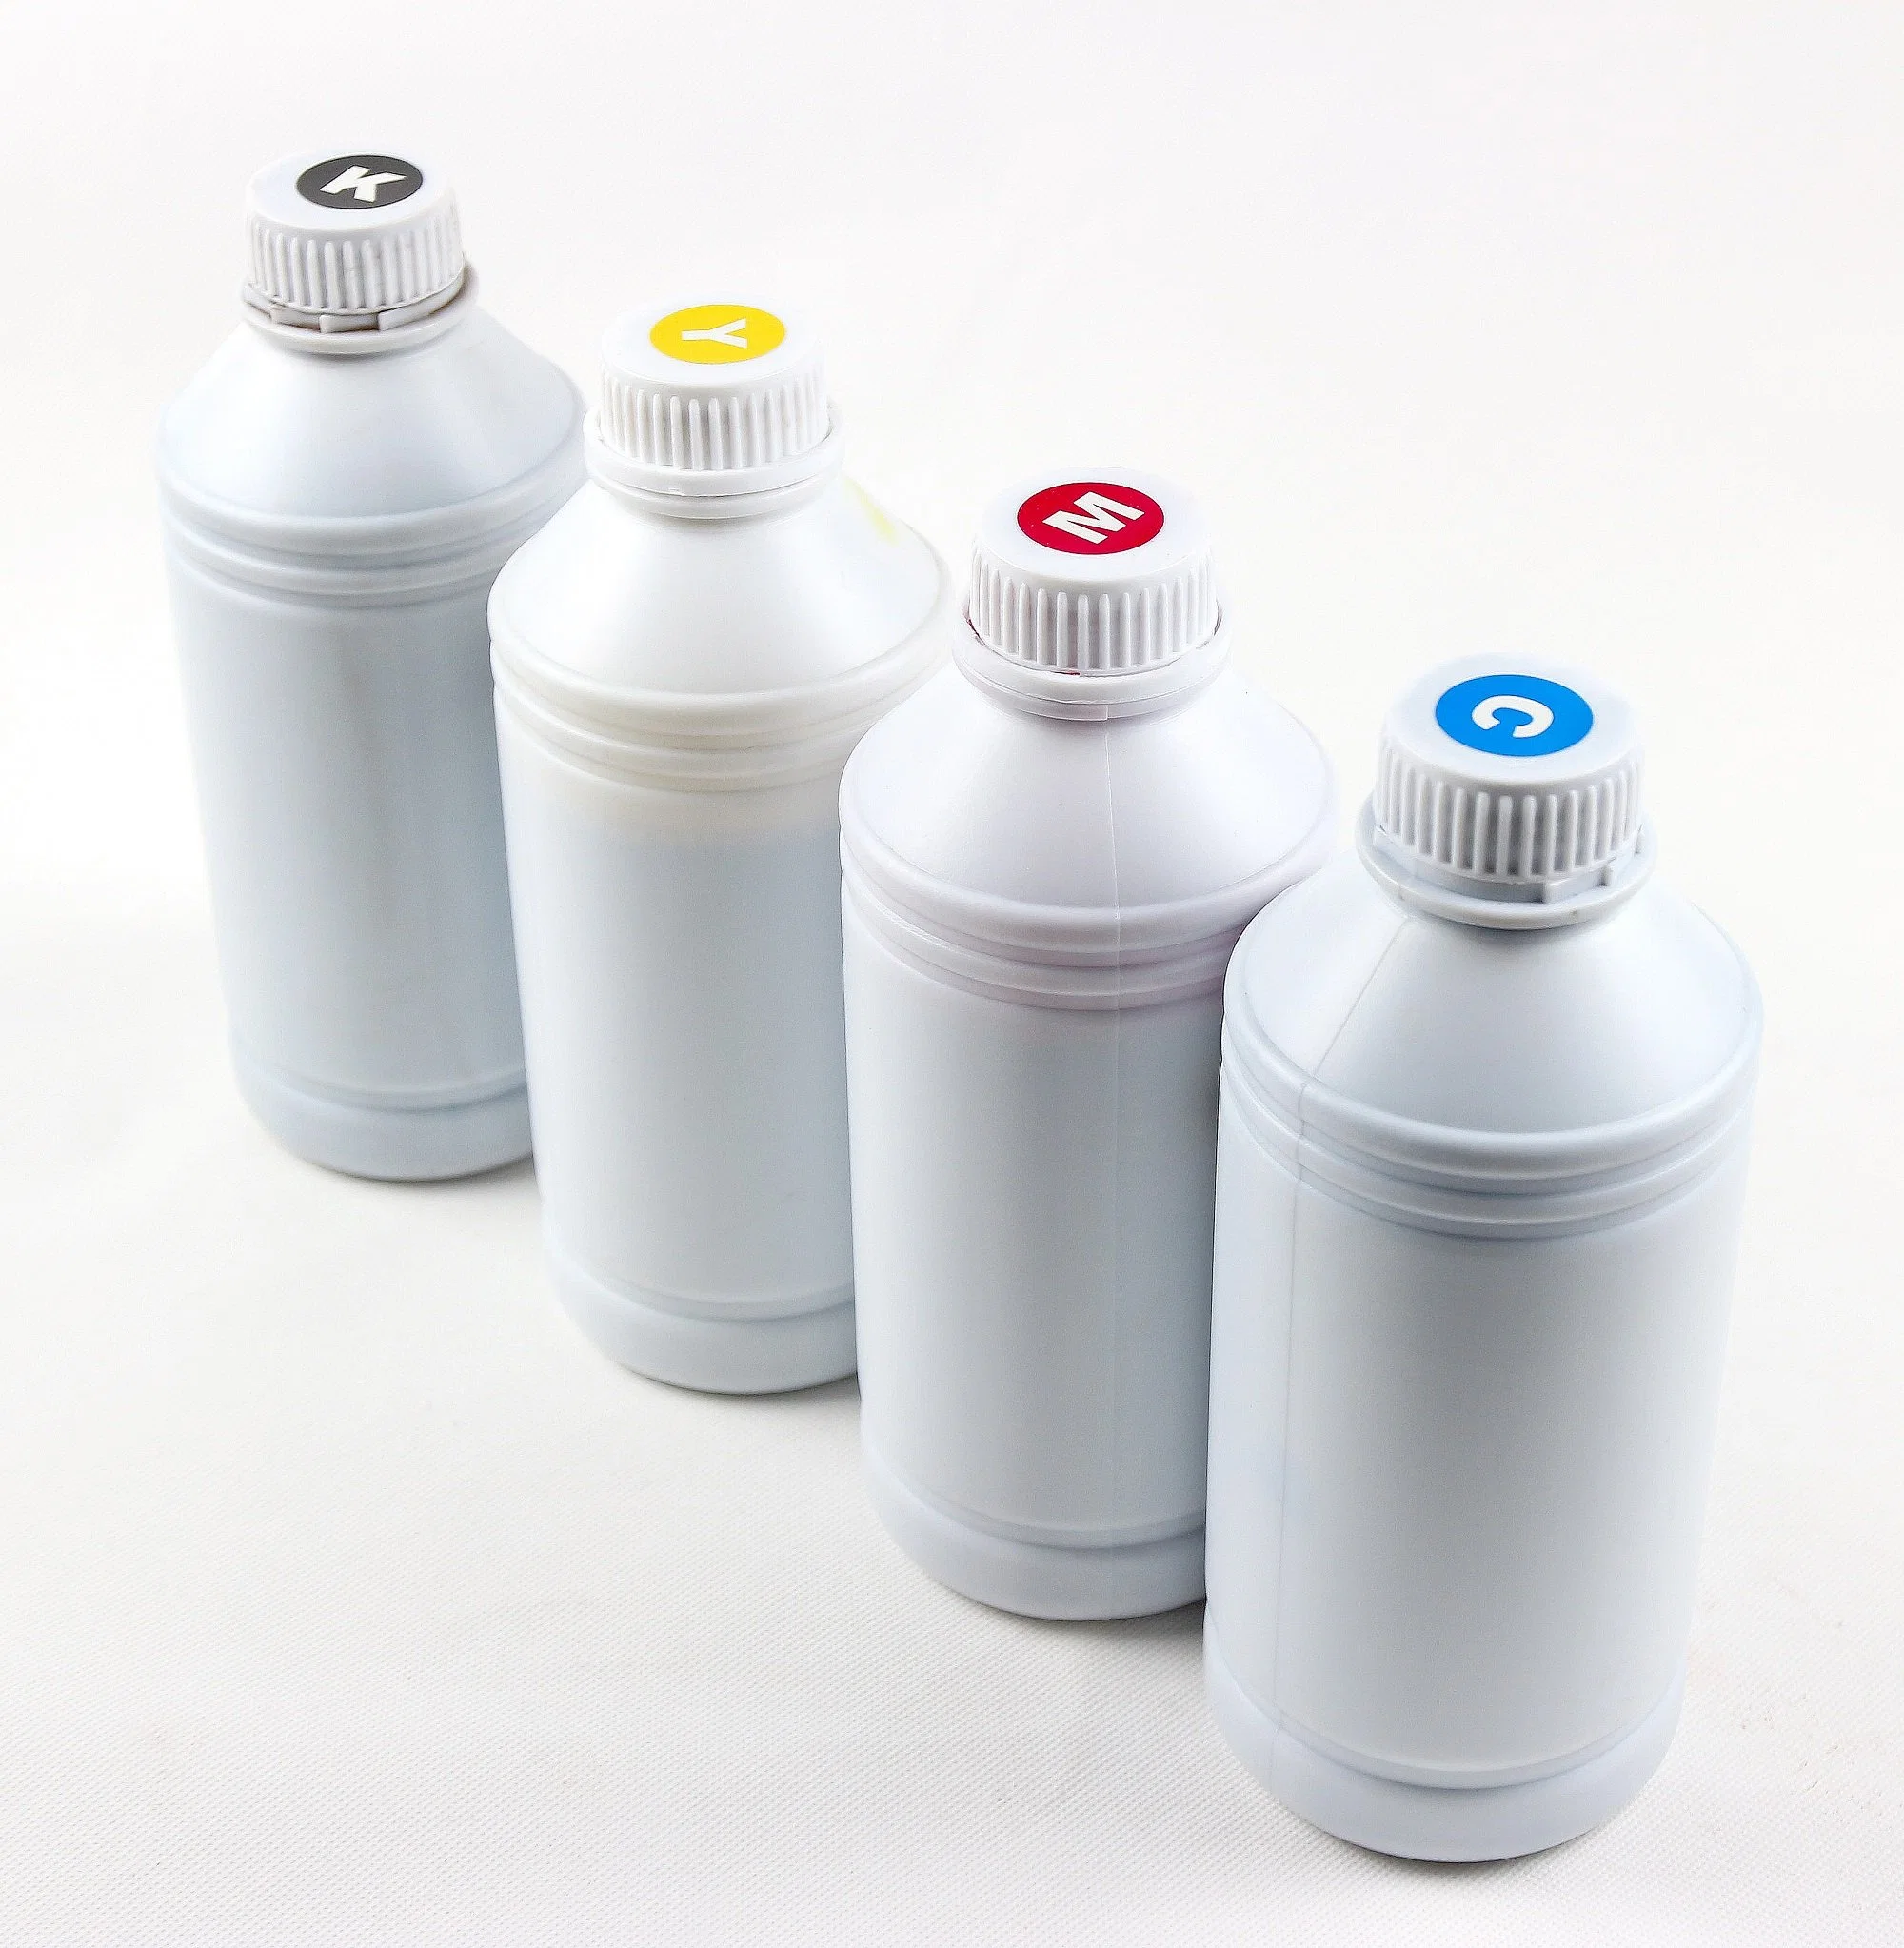 Inks for Epson Printer and Printing on Sublimation Paper for Carpet Application